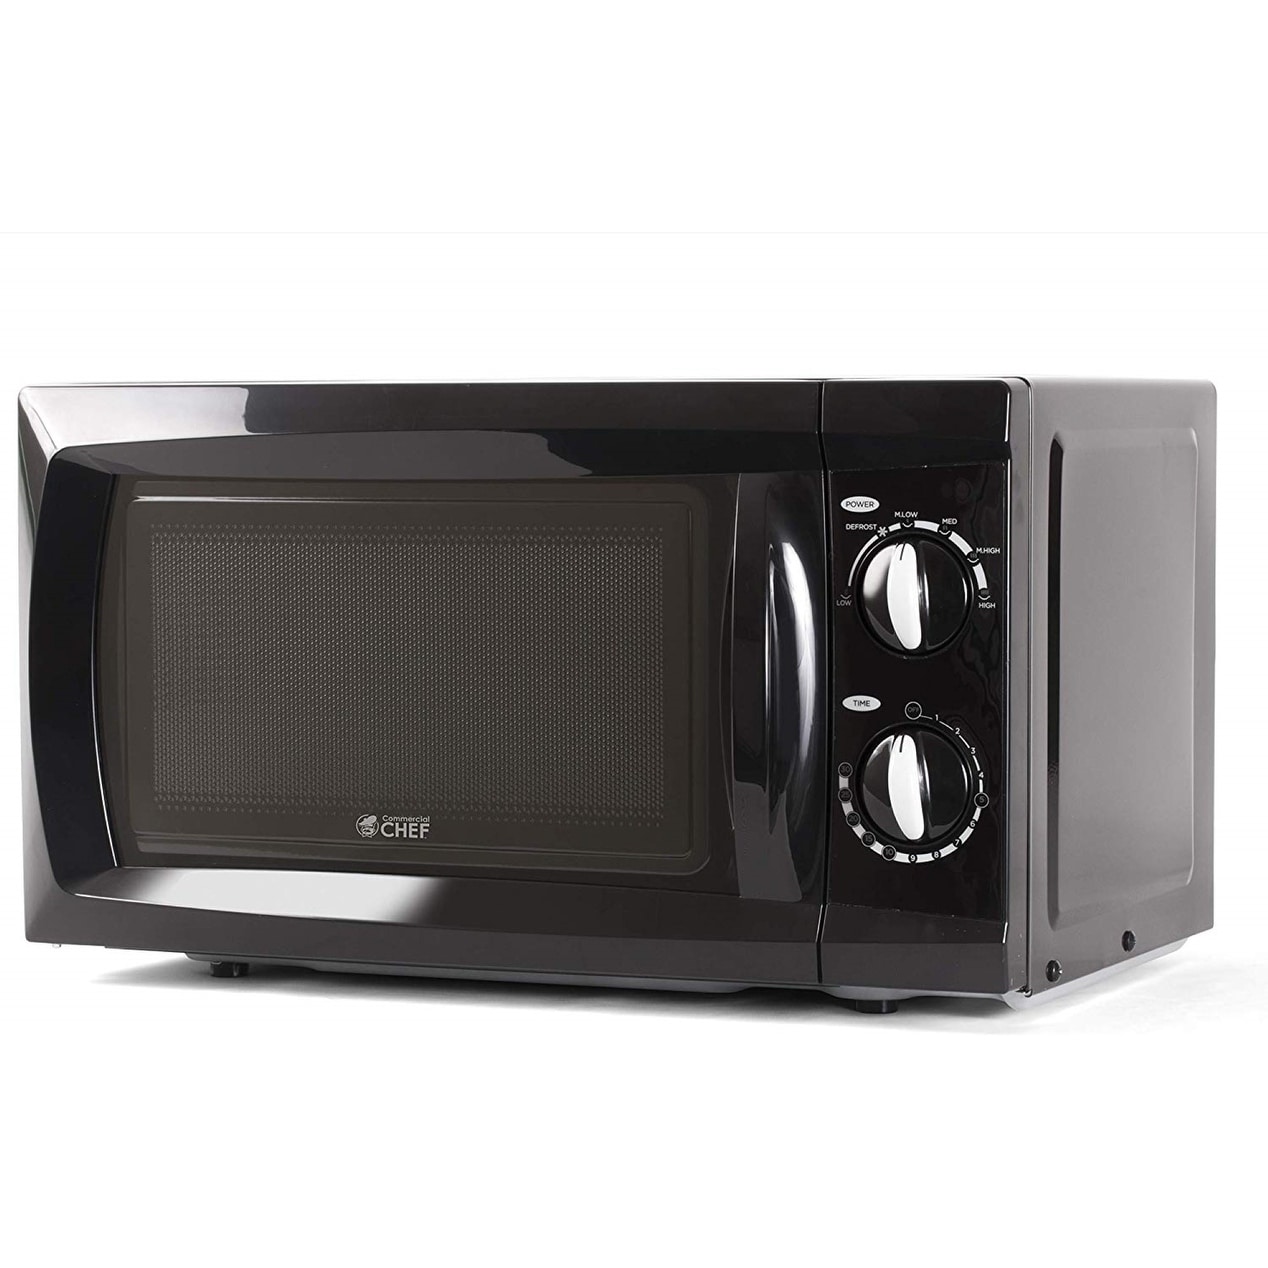 Commercial Chef Countertop Microwave Oven 0.7 Cu. ft. 700W, White